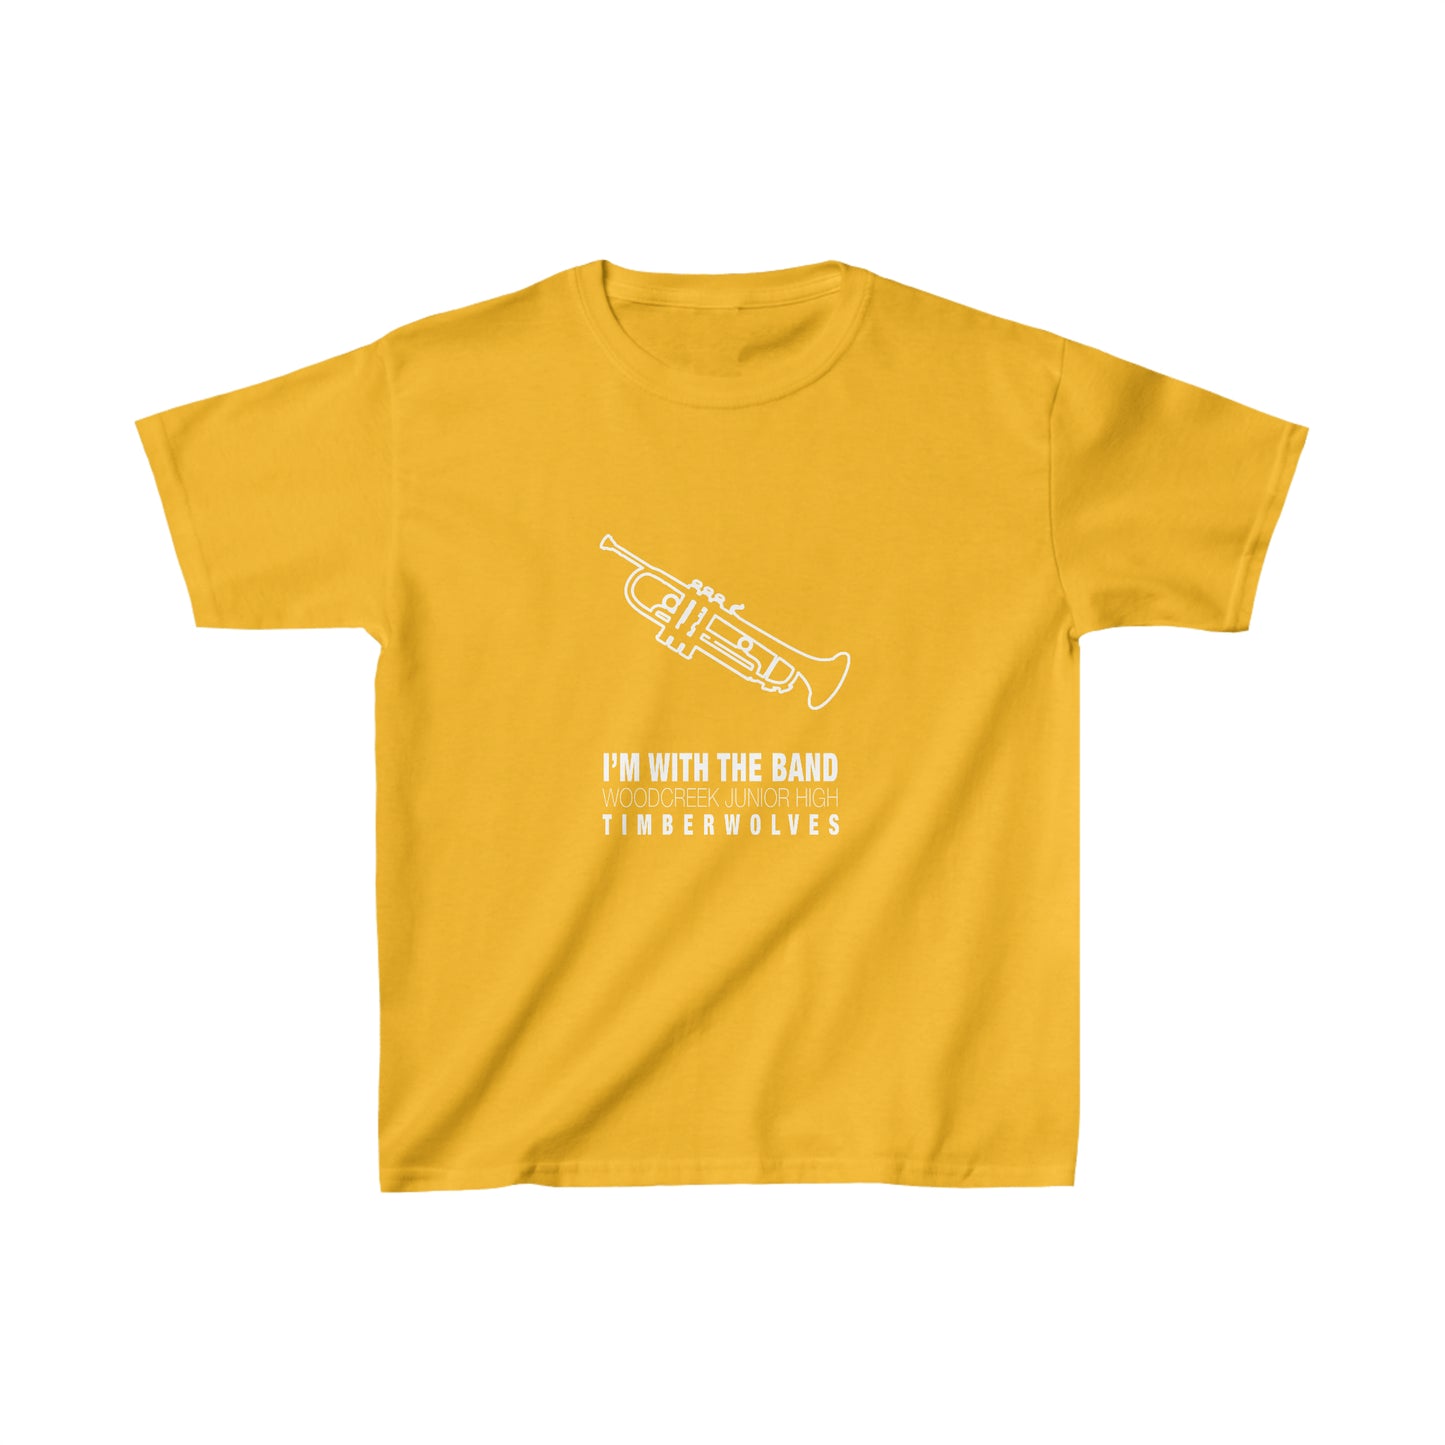 WCJH - I'M WITH THE BAND Youth Trumpet Tee (13 color options)